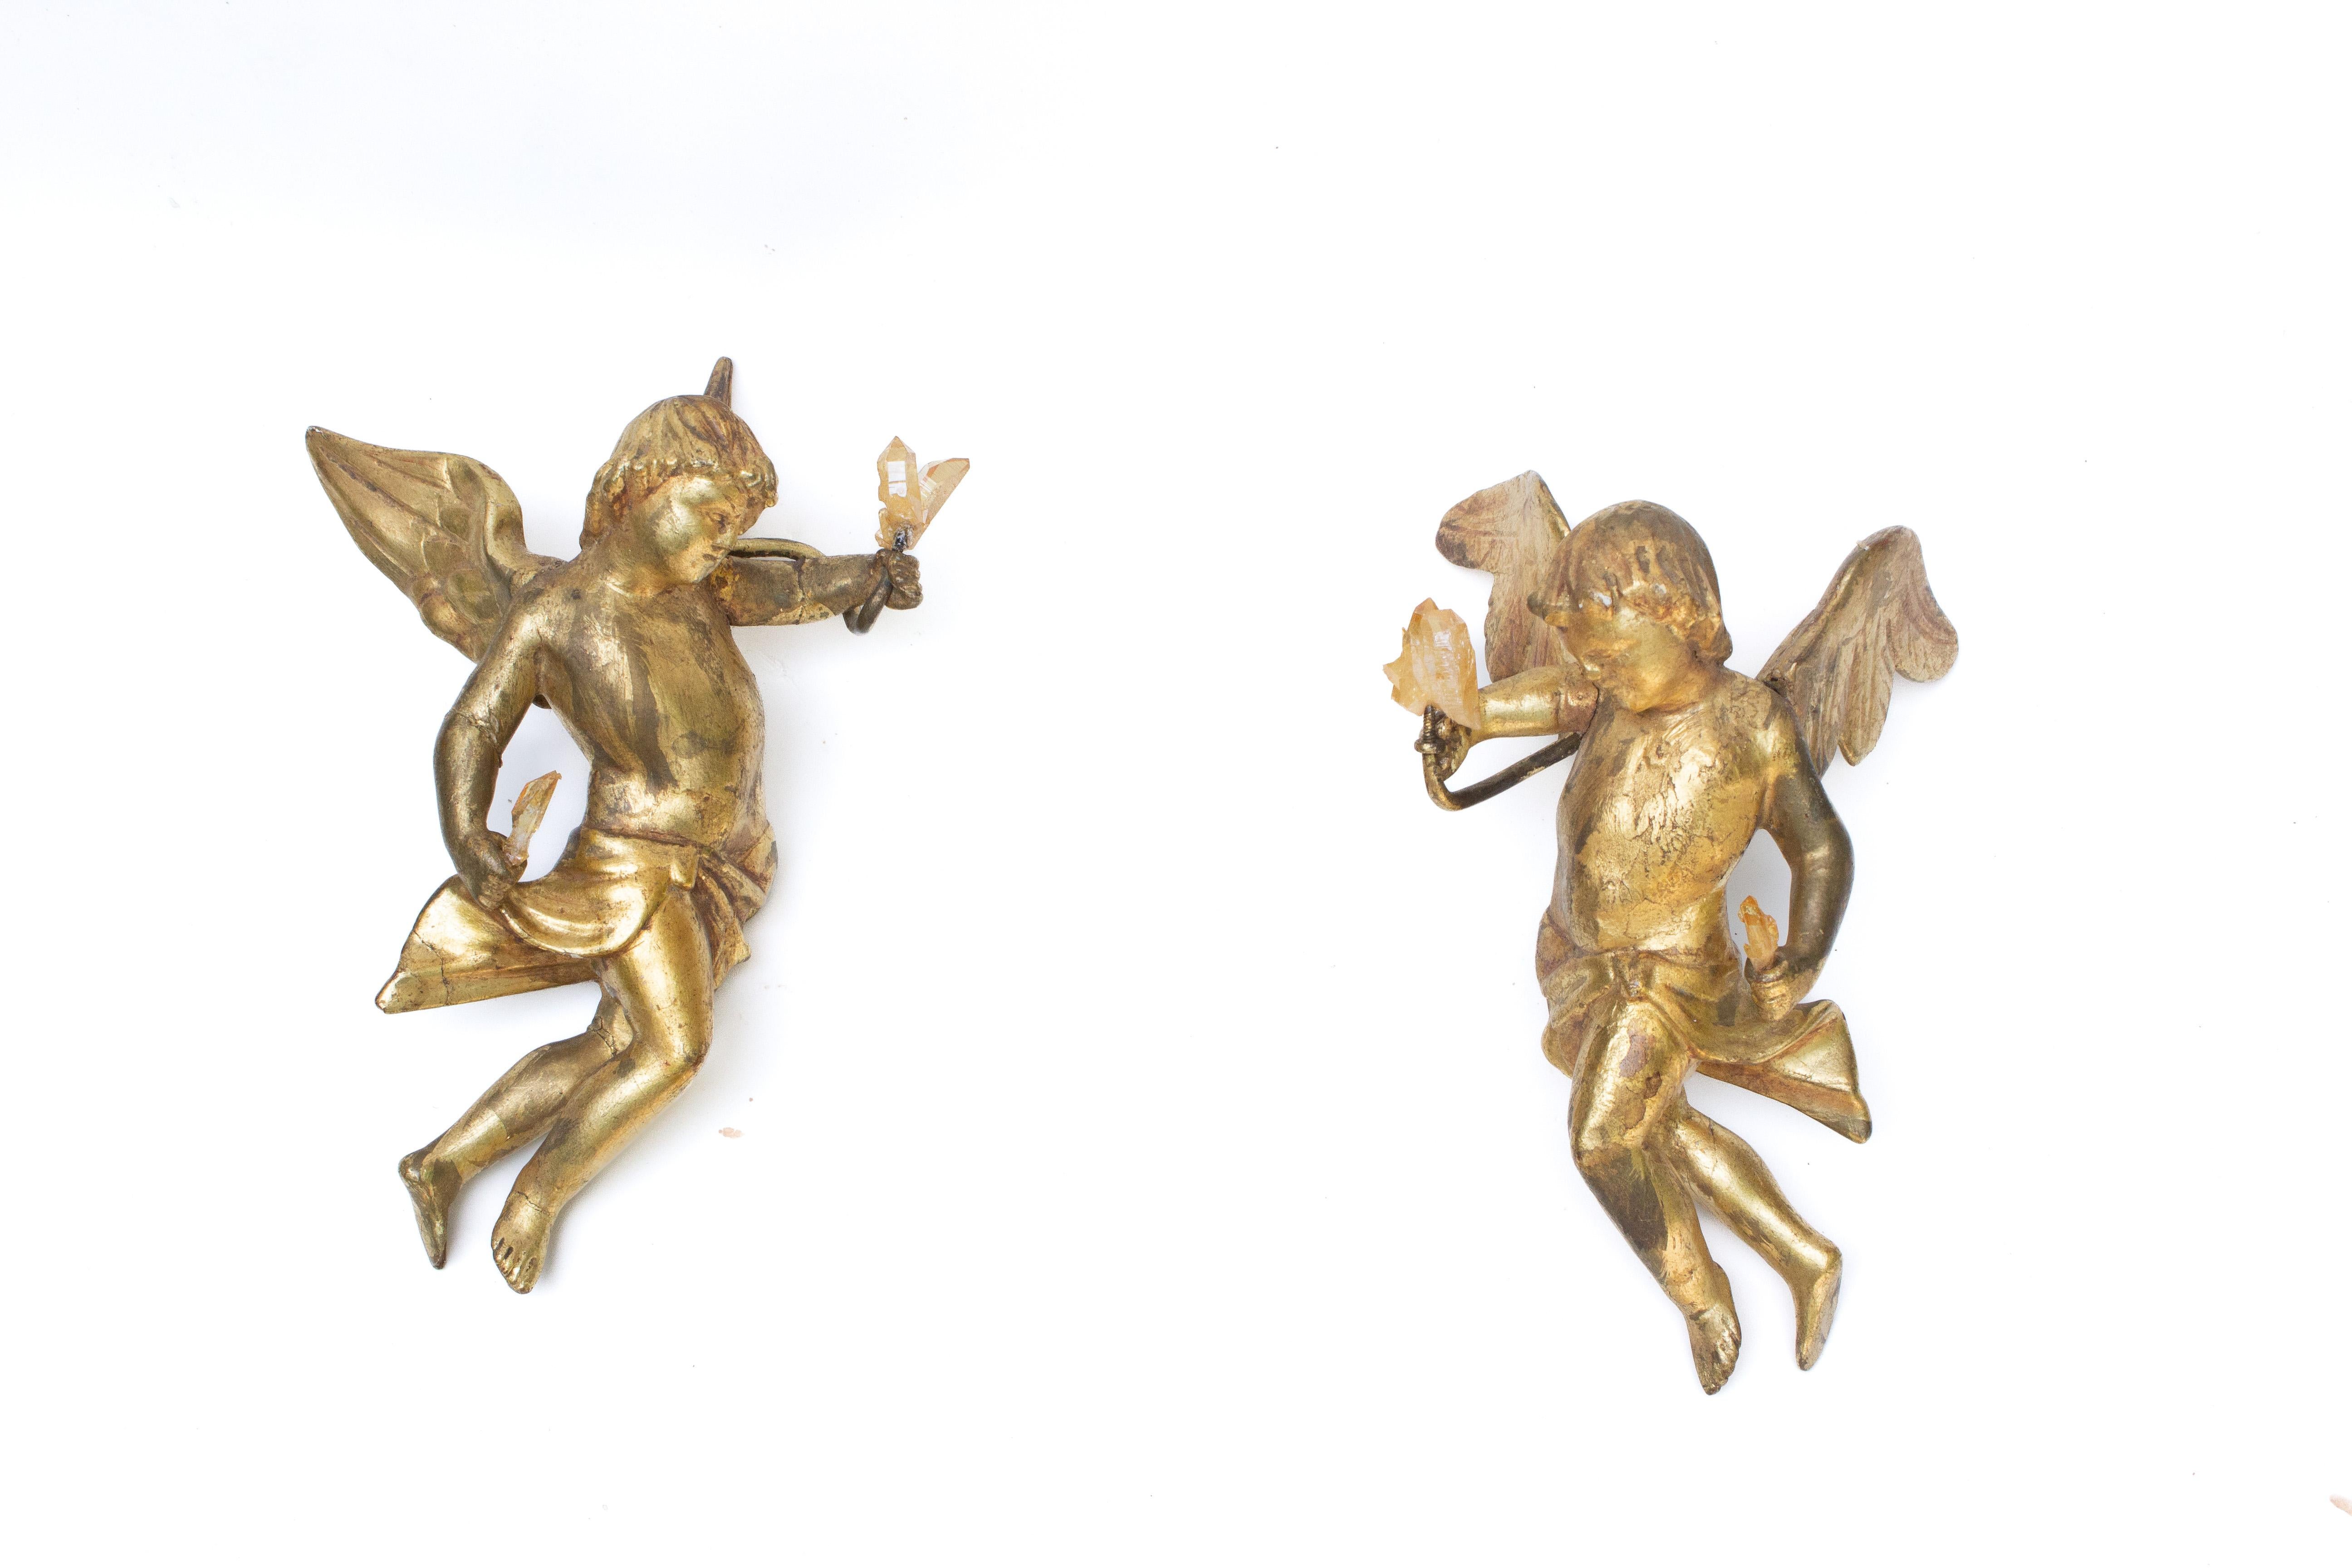 Rococo Pair of 18th Century Italian Gilded Angels with Golden Quartz Crystals  For Sale